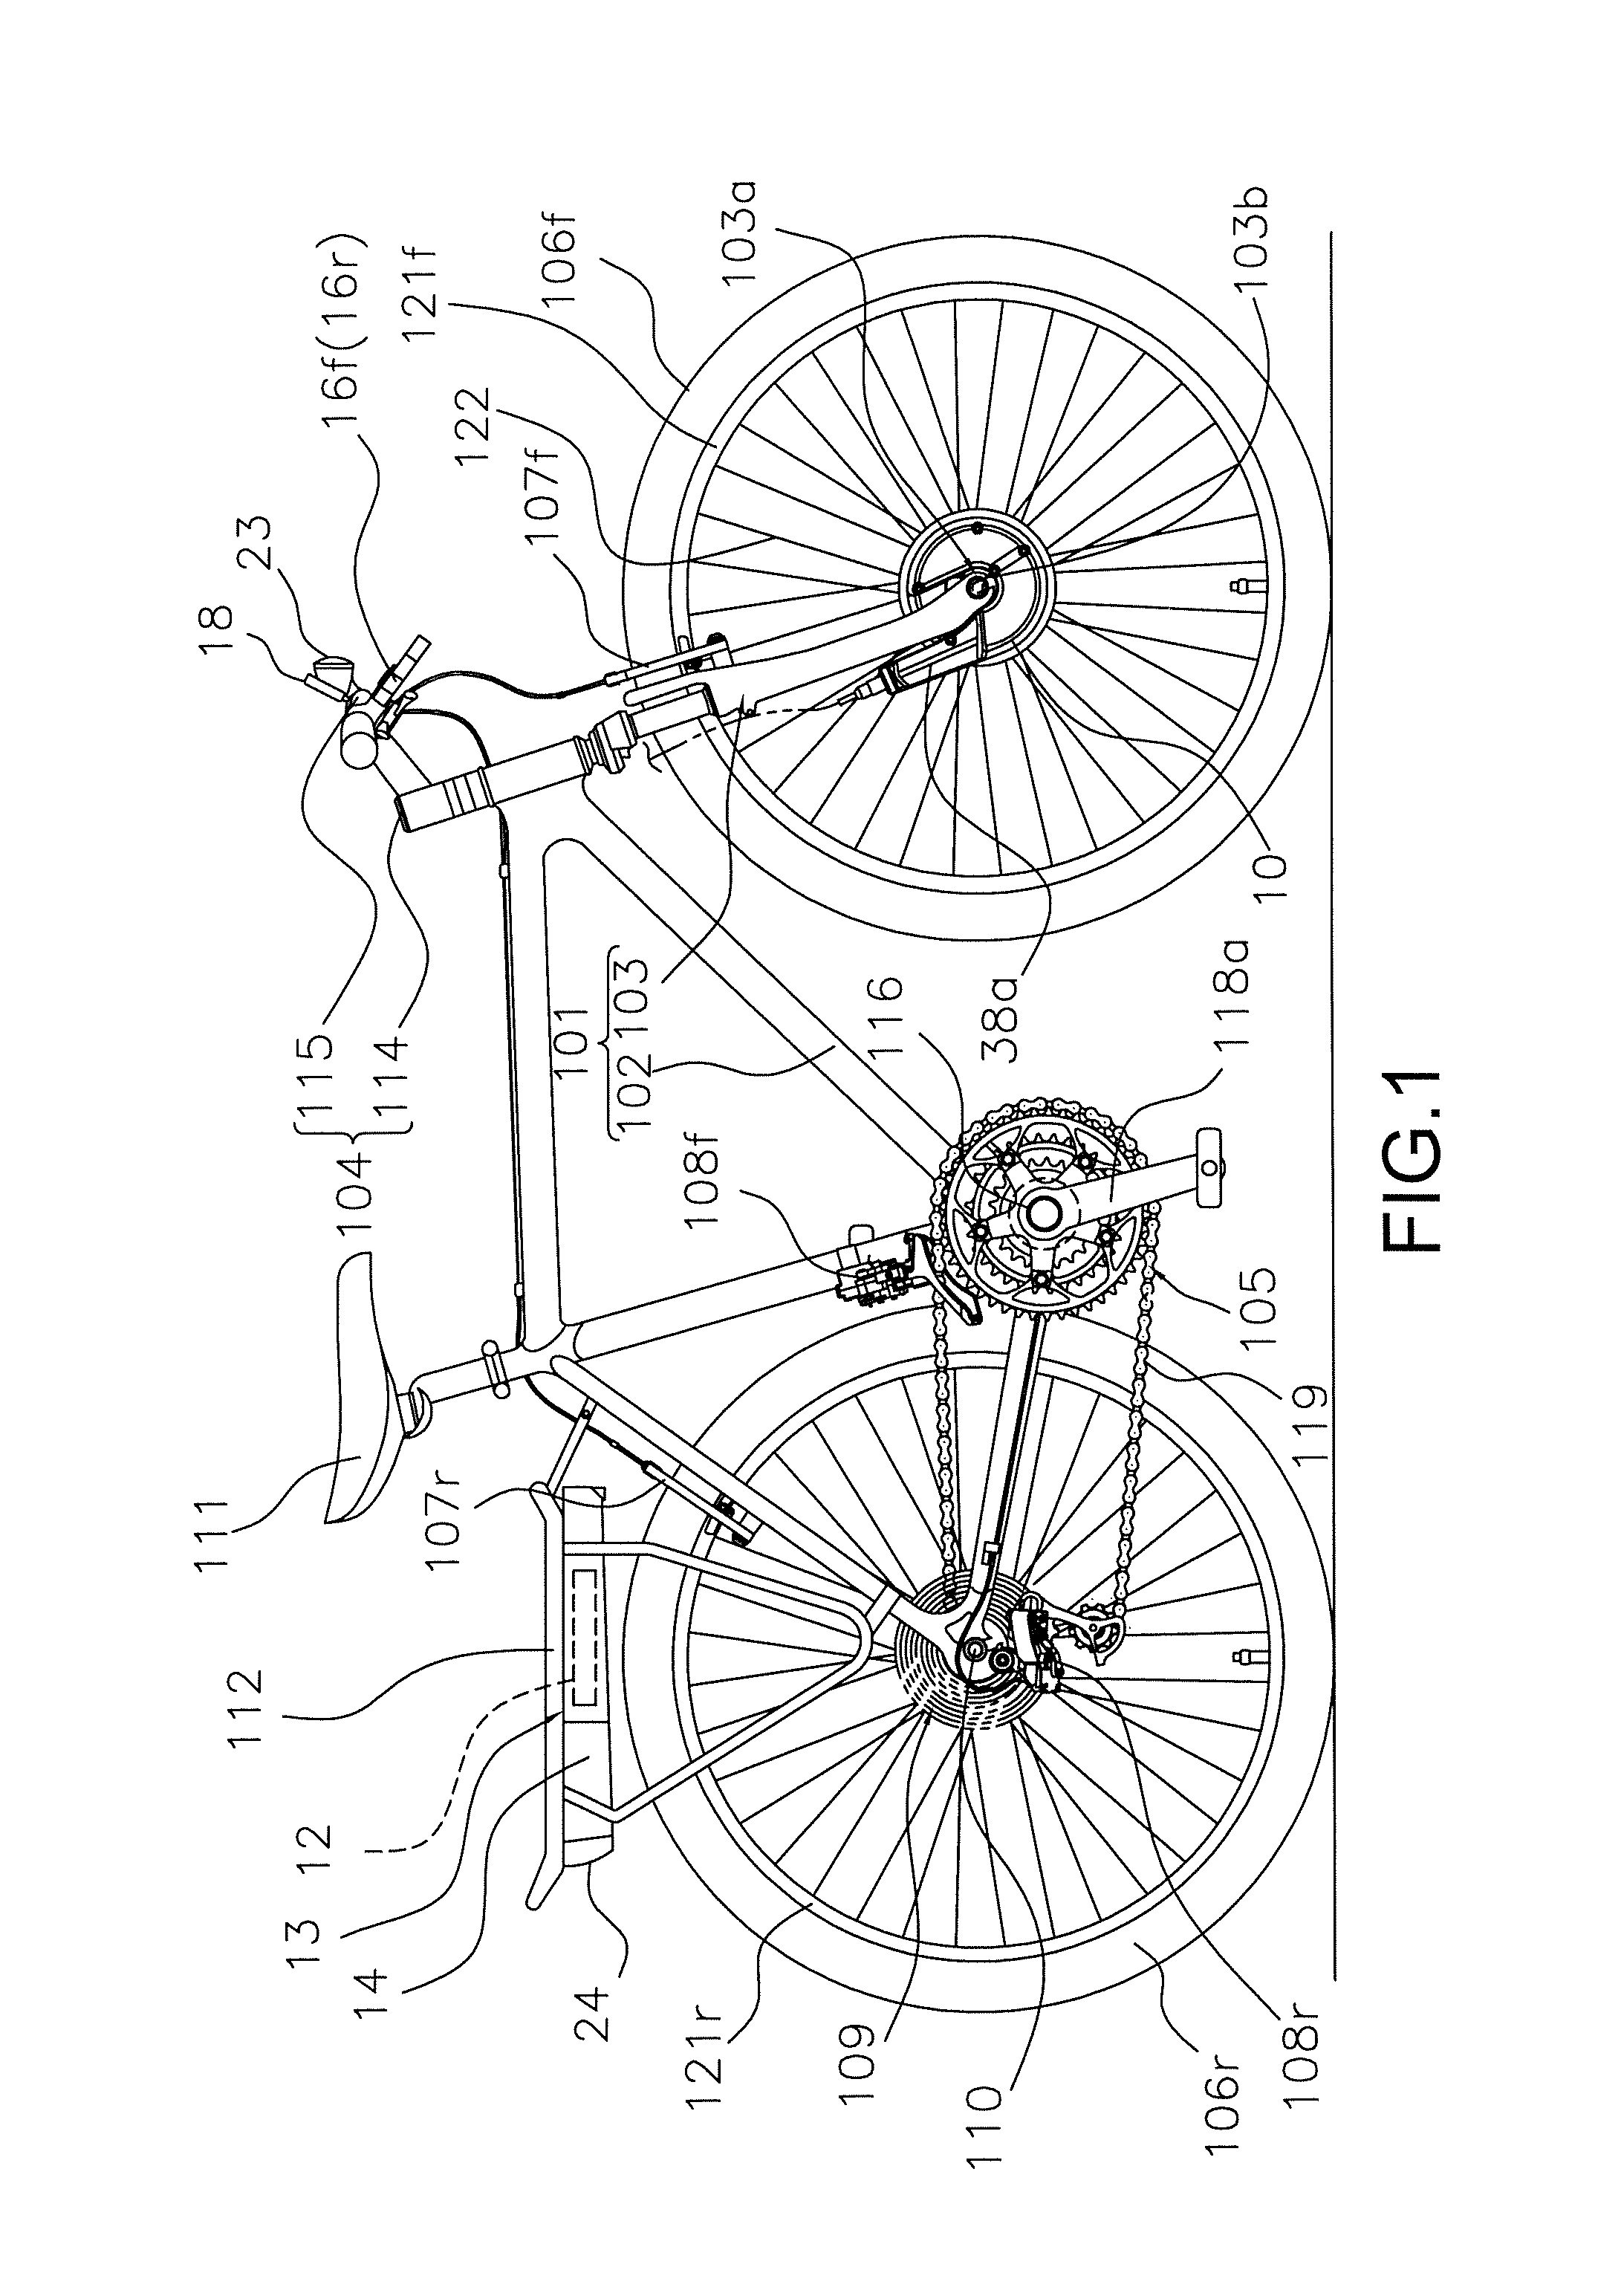 Bicycle motor control system